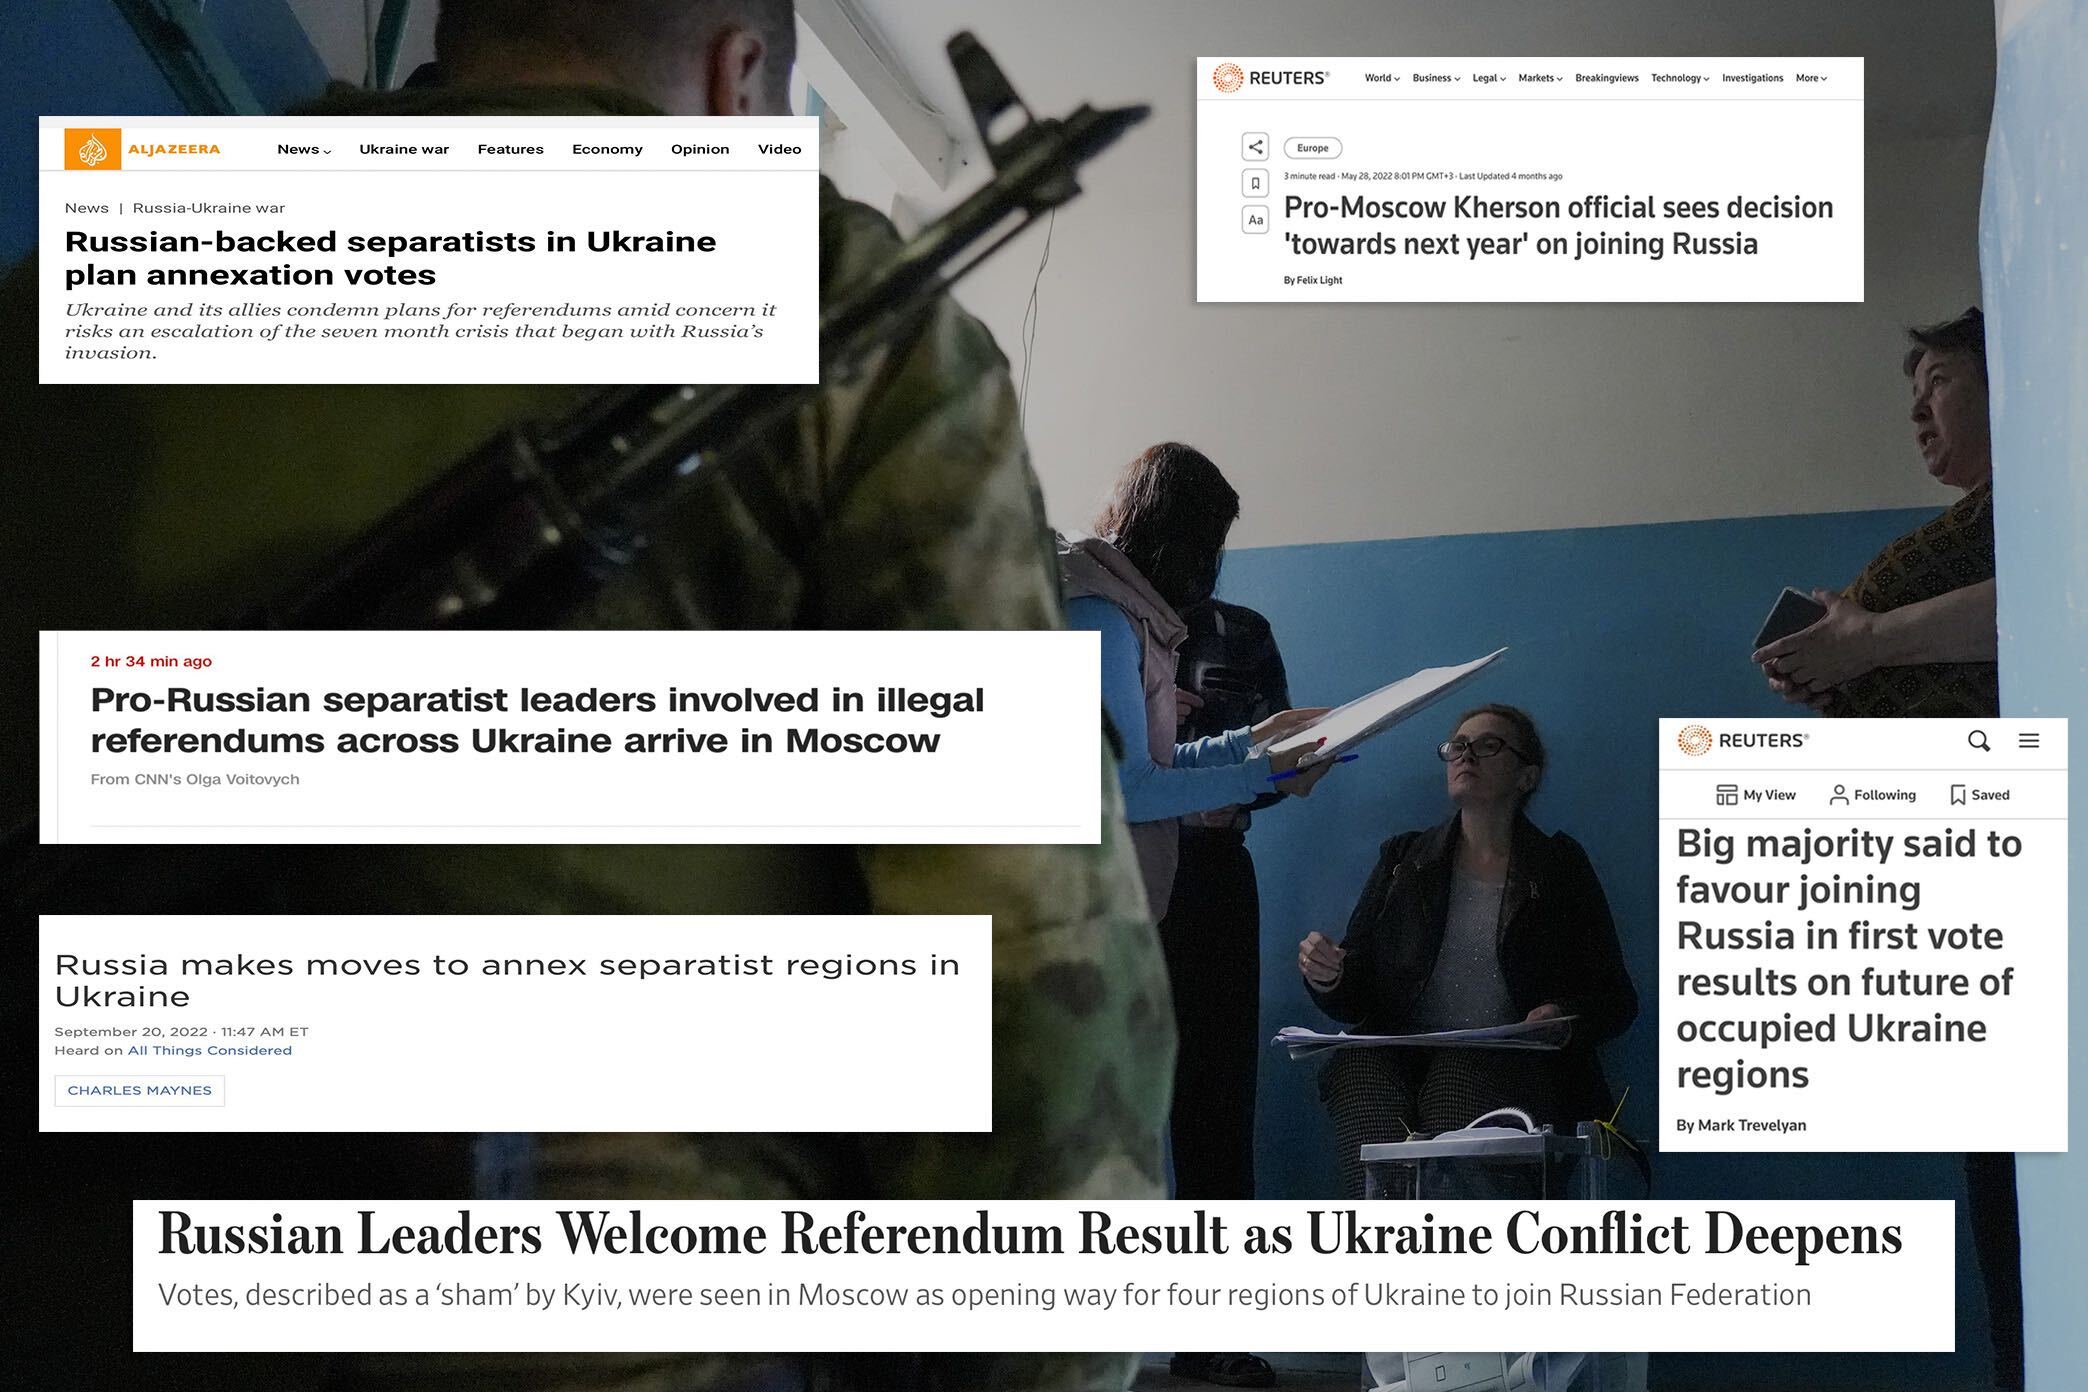 Editorial: Stop using Russia’s propaganda language to talk about its war in Ukraine